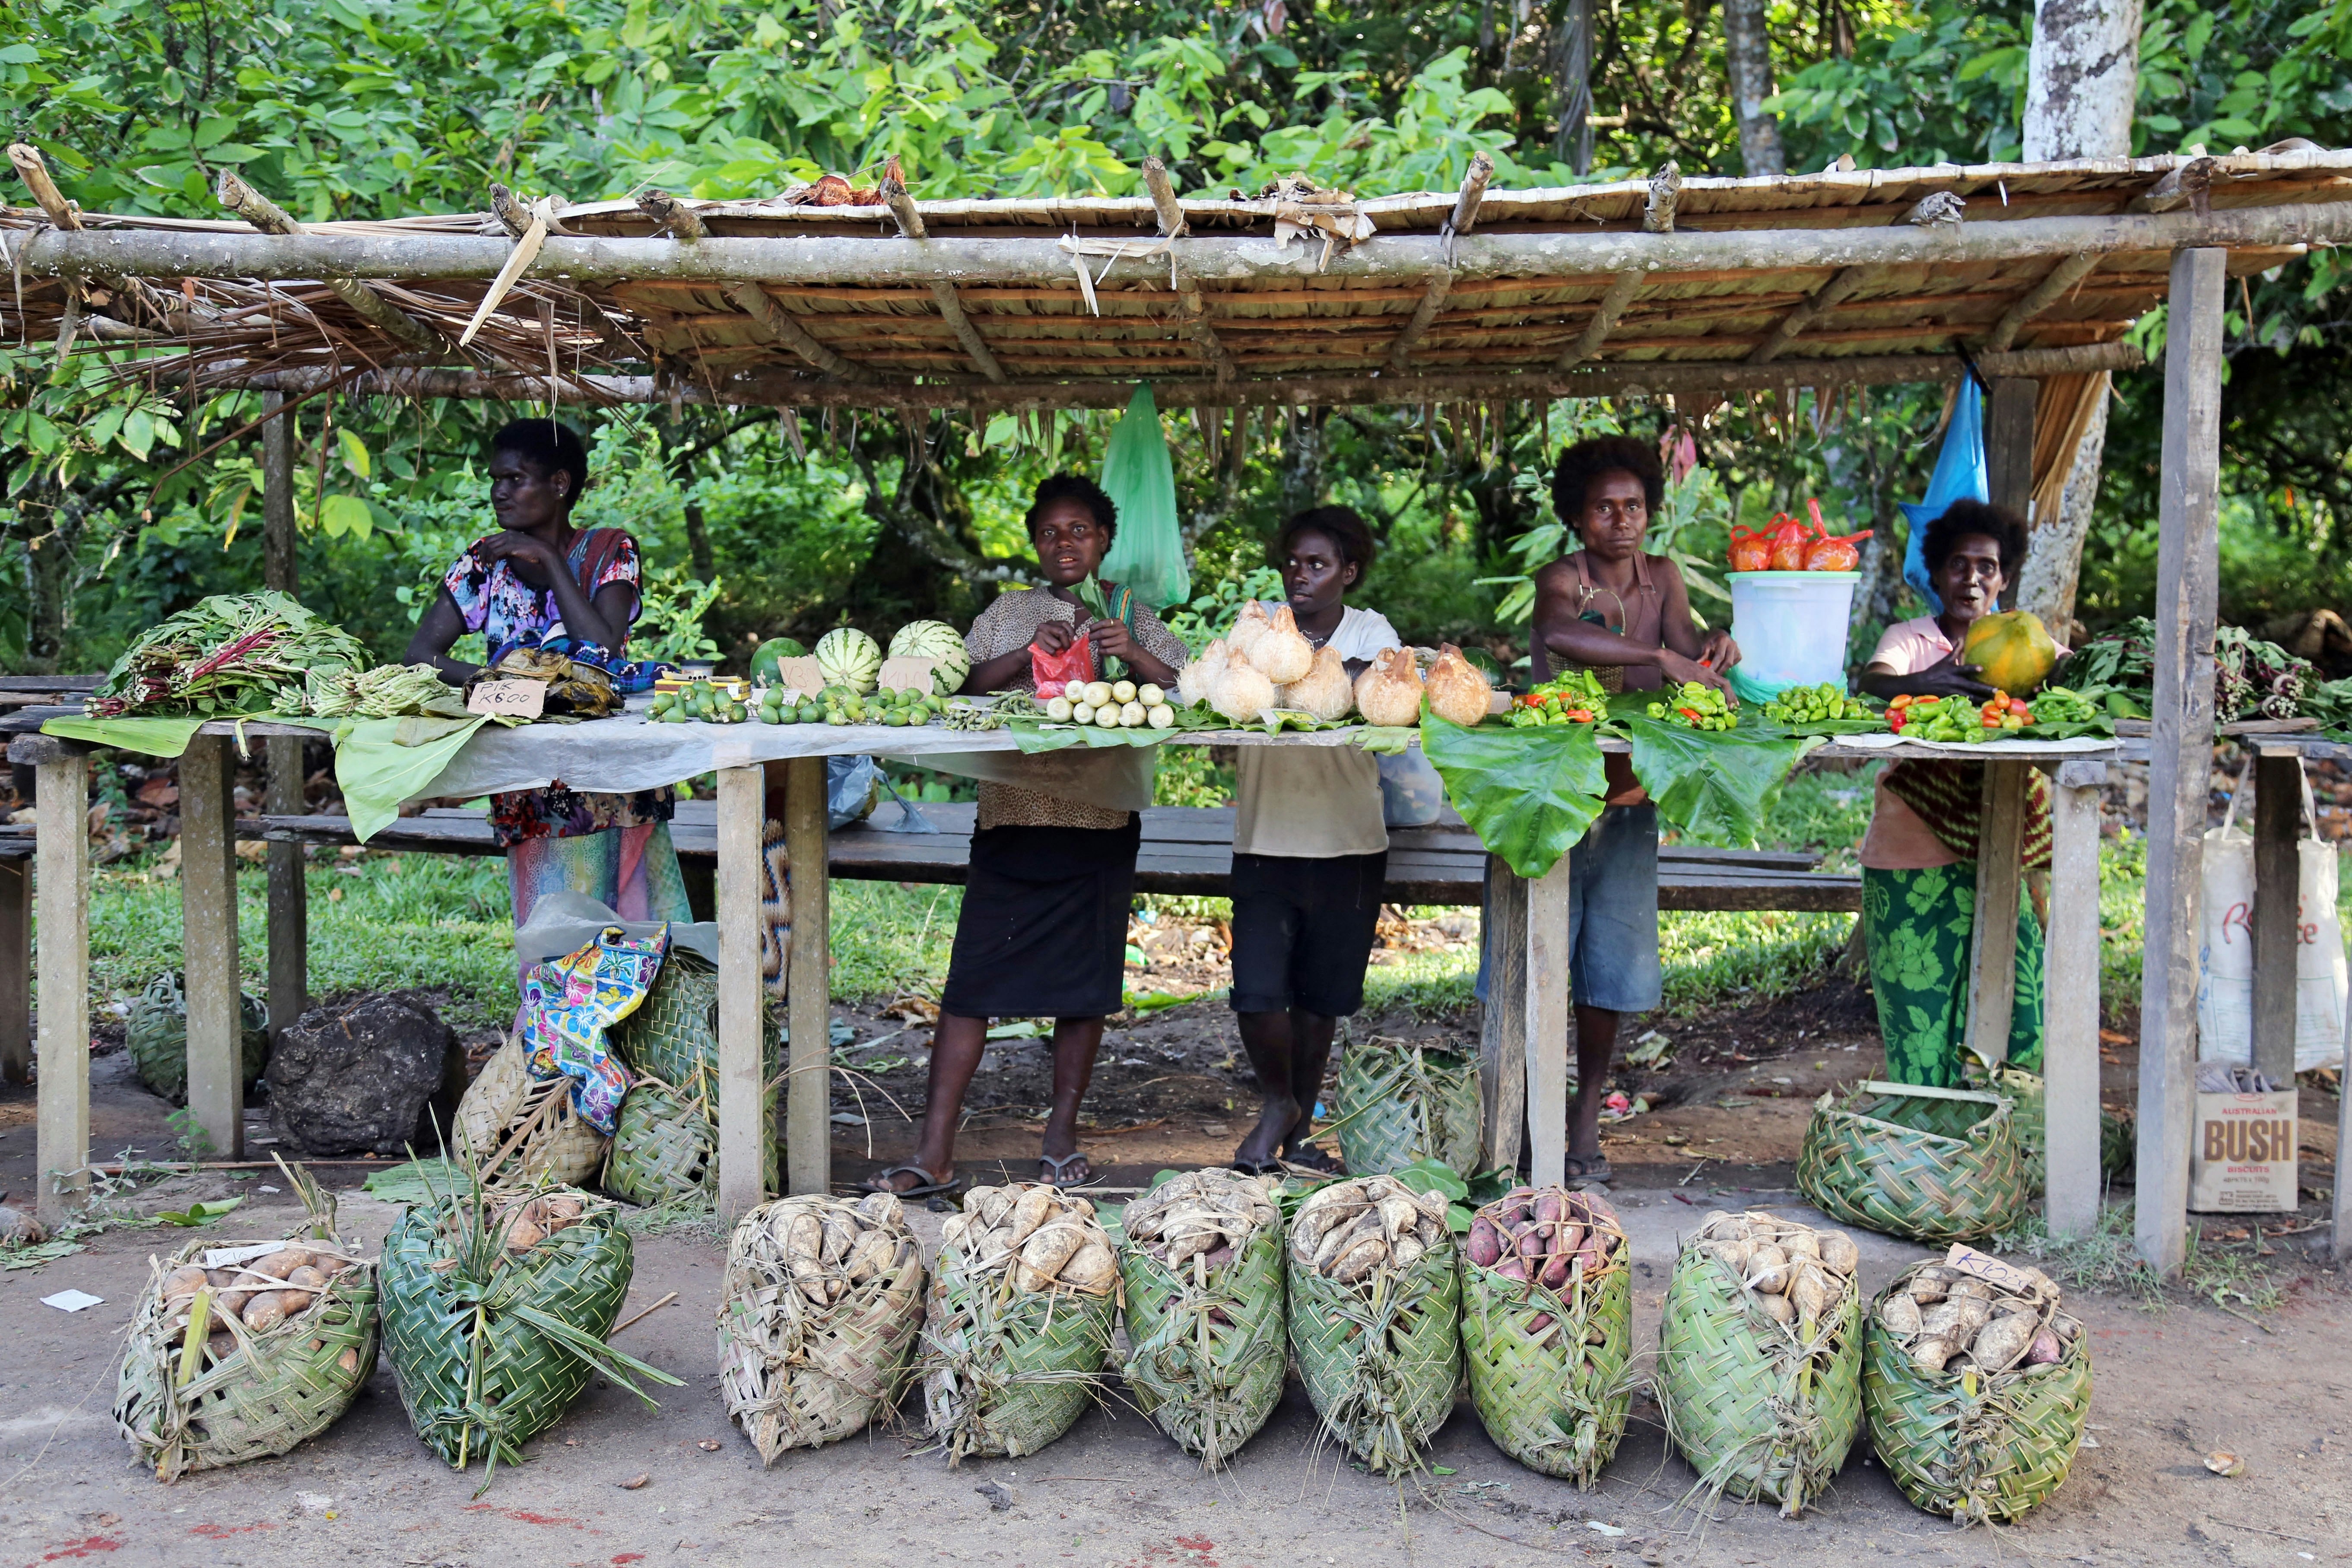 Women at a market stall in Bougainville